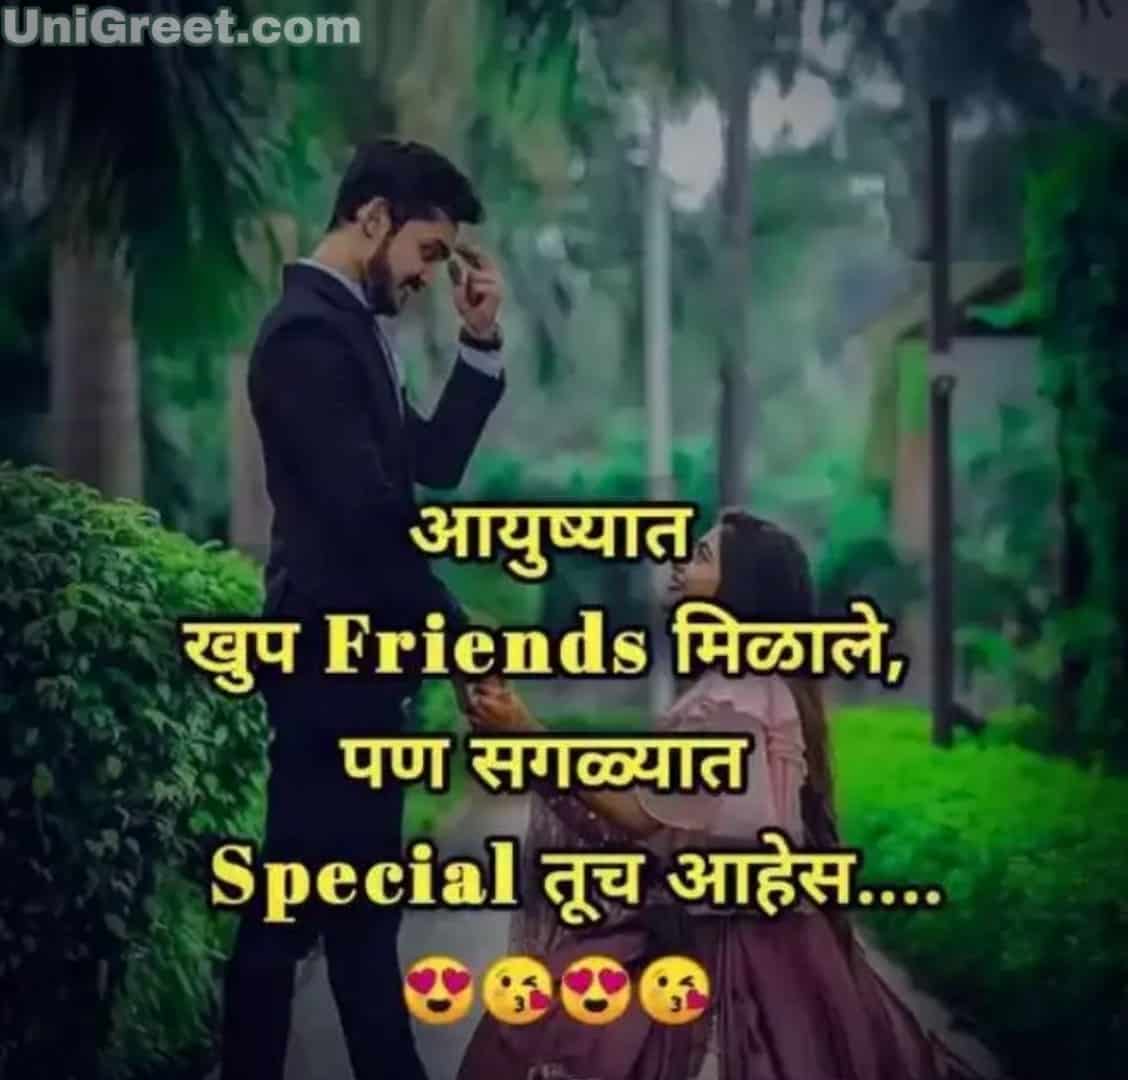 Best dating best friend quotes in hindi shayari for my 2022